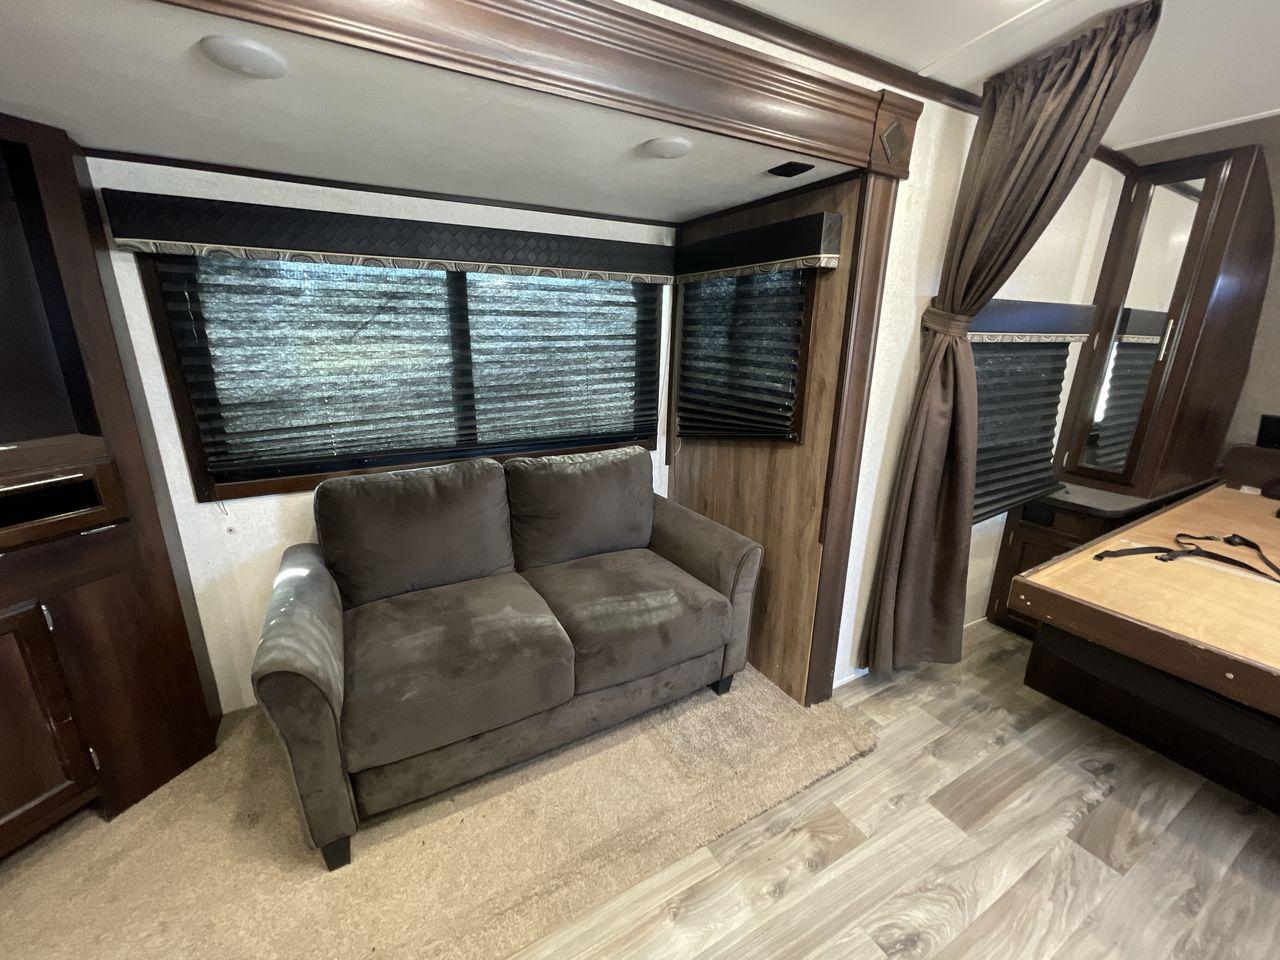 2018 WHITE JAYCO JAY FLIGHT 23MRB (1UJBJ0BN5J1) , Length: 28.17 ft | Dry Weight: 5,560 lbs. | Gross Weight: 7,250 lbs. | Slides: 1 transmission, located at 4319 N Main Street, Cleburne, TX, 76033, (817) 221-0660, 32.435829, -97.384178 - The 2018 Jayco Jay Flight 23MRB is a travel trailer that encapsulates both compactness and luxury for unparalleled camping experiences. Spanning 28 feet in length, this model boasts a thoughtfully arranged interior featuring a single slide-out, seamlessly amplifying the living space. The Jay Flight - Photo #11